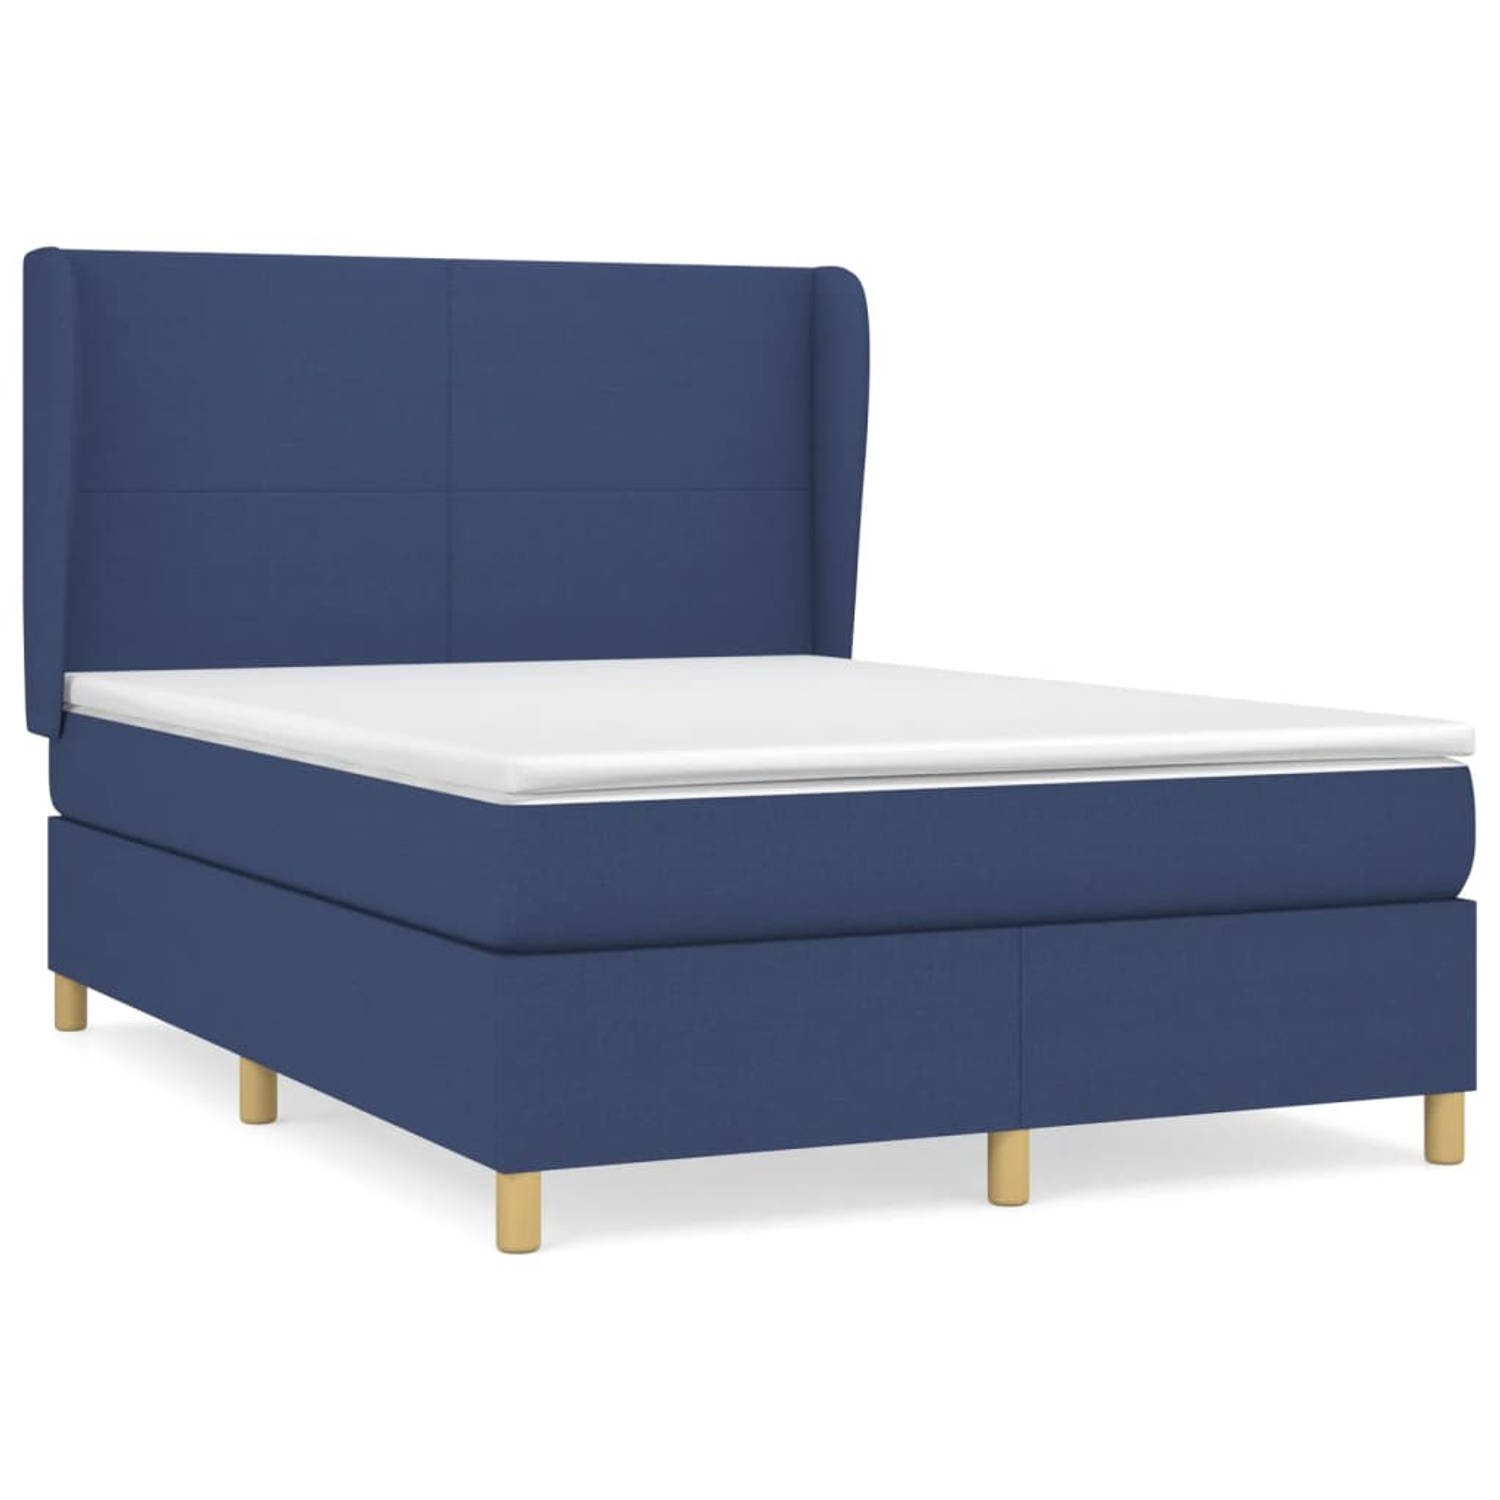 The Living Store Boxspringbed - Comfort - Bed - 203x147x118/128 cm - Blauw